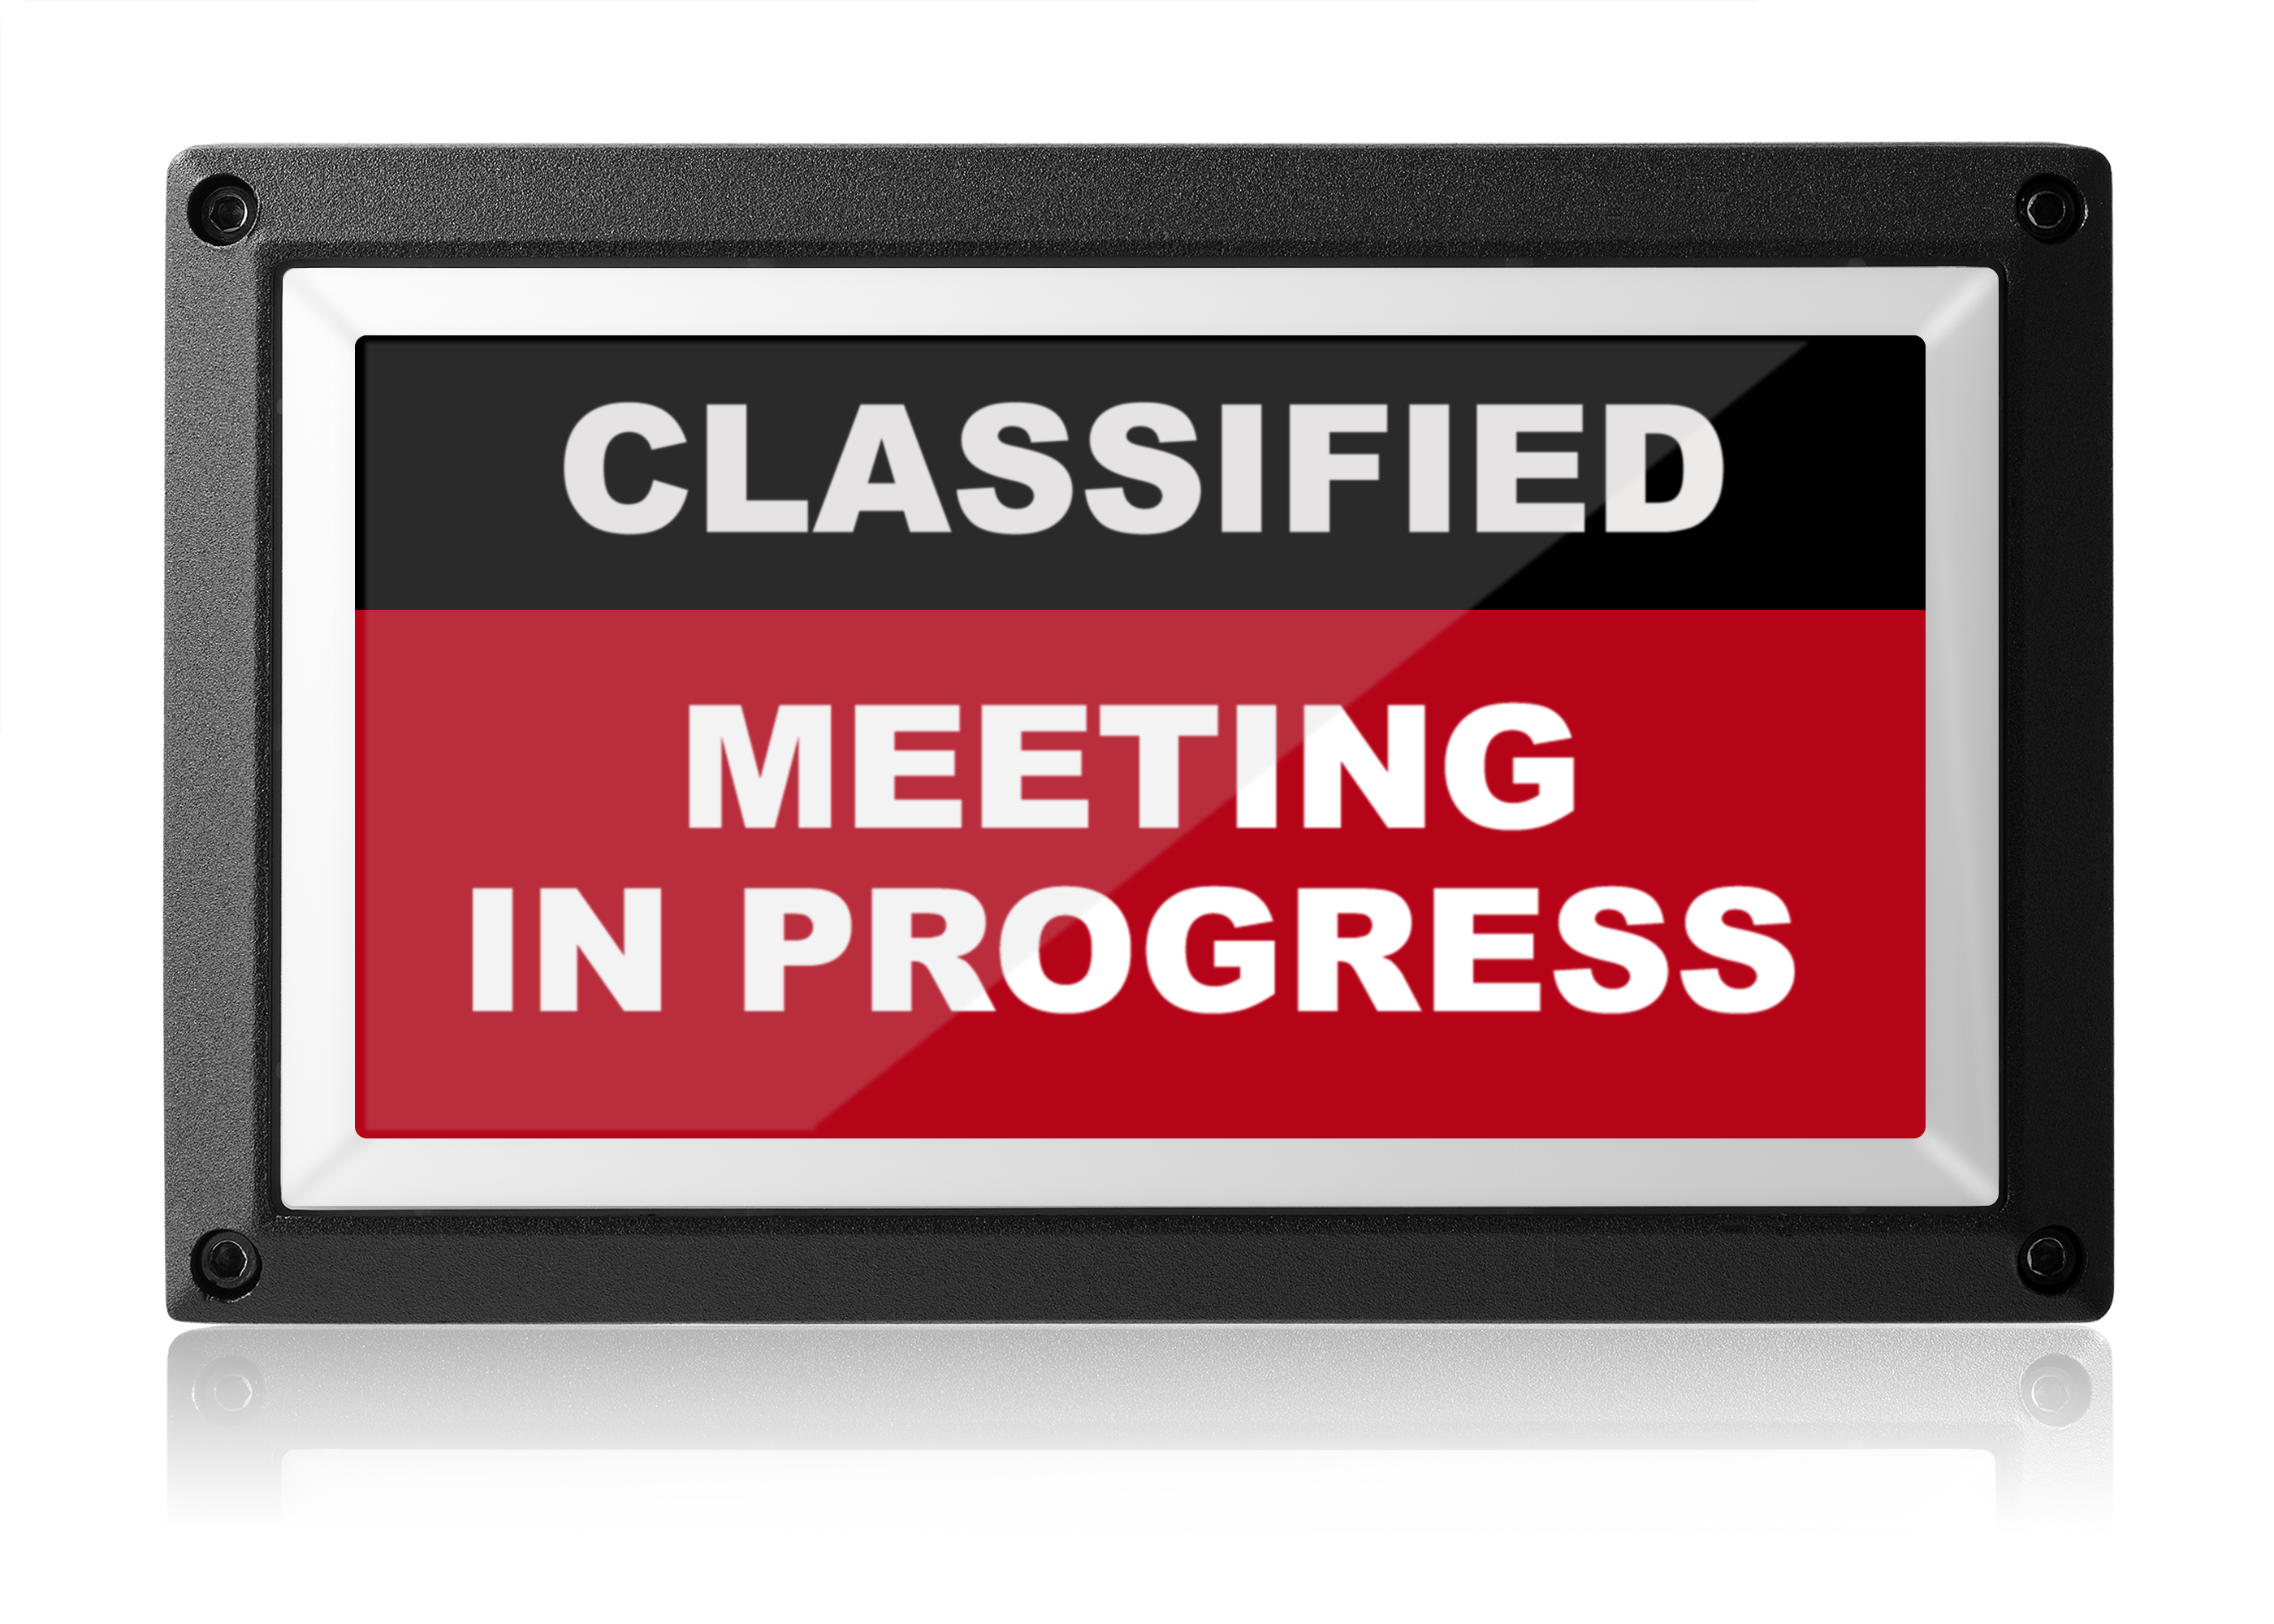 Classified Meeting In Progress Light - Red ISO - Rekall Dynamics LED Sign